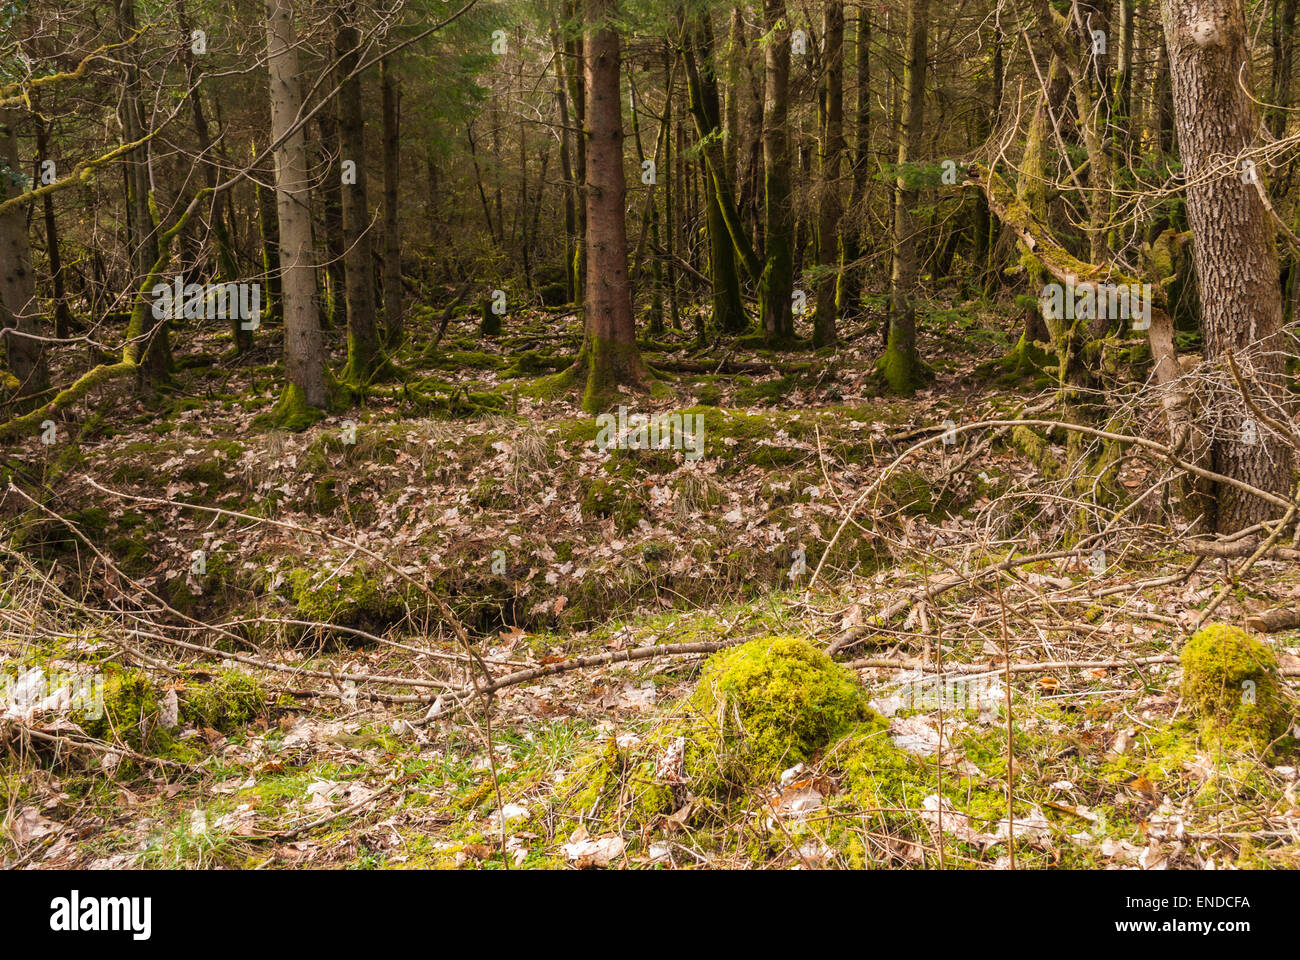 The forest floor in a coniferous forest Stock Photo